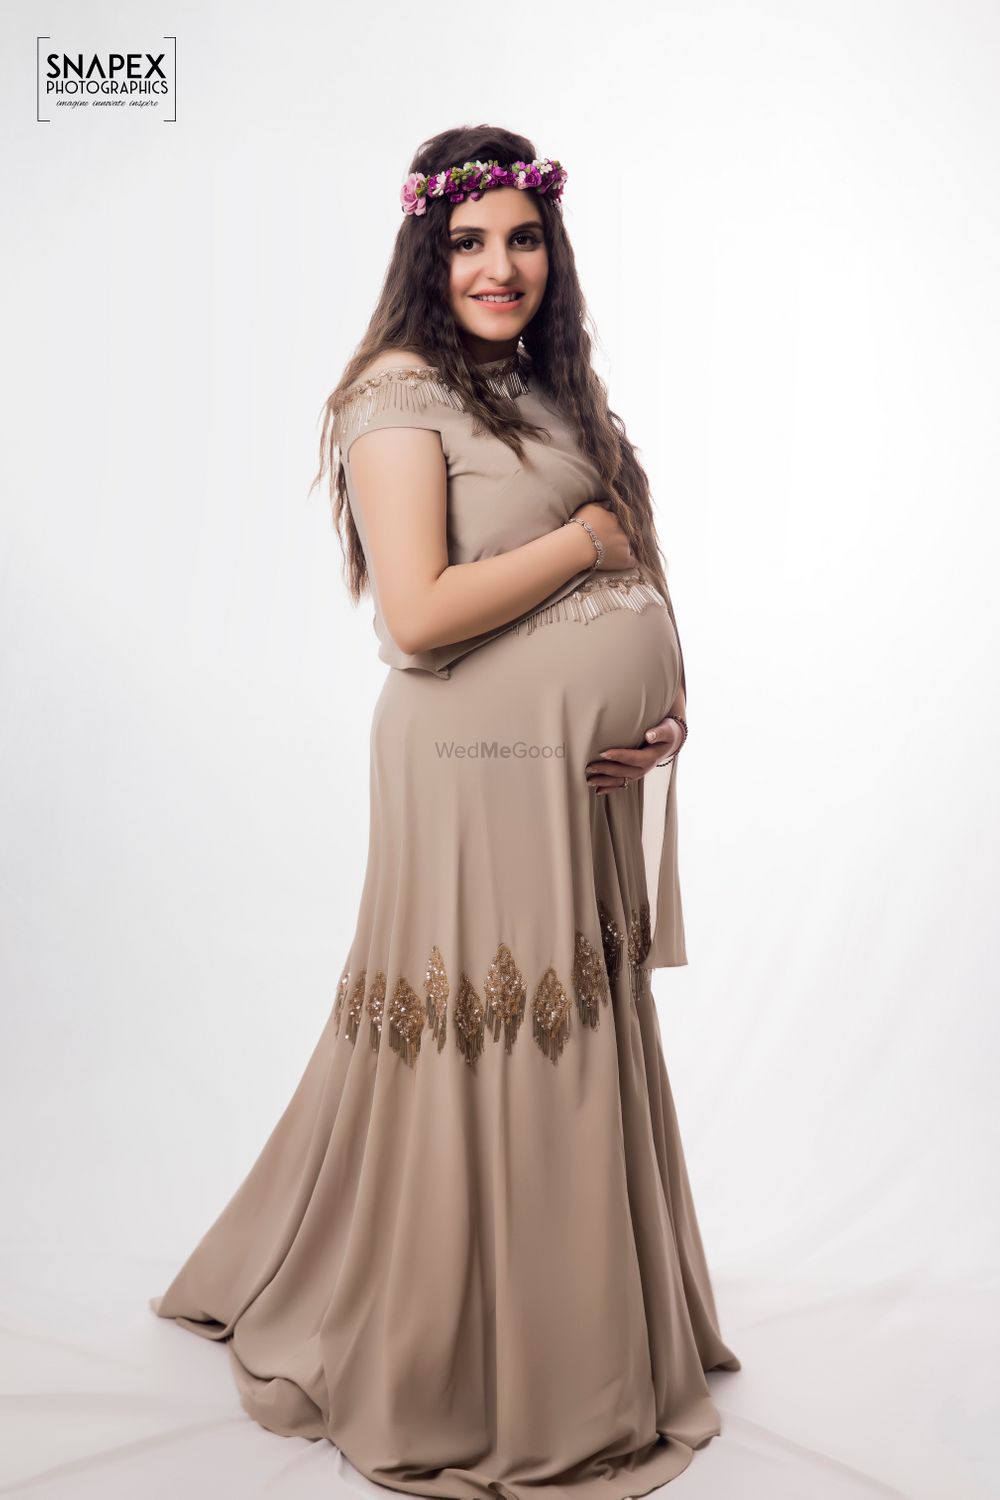 Photo From Maternity - By Snapex Photographics